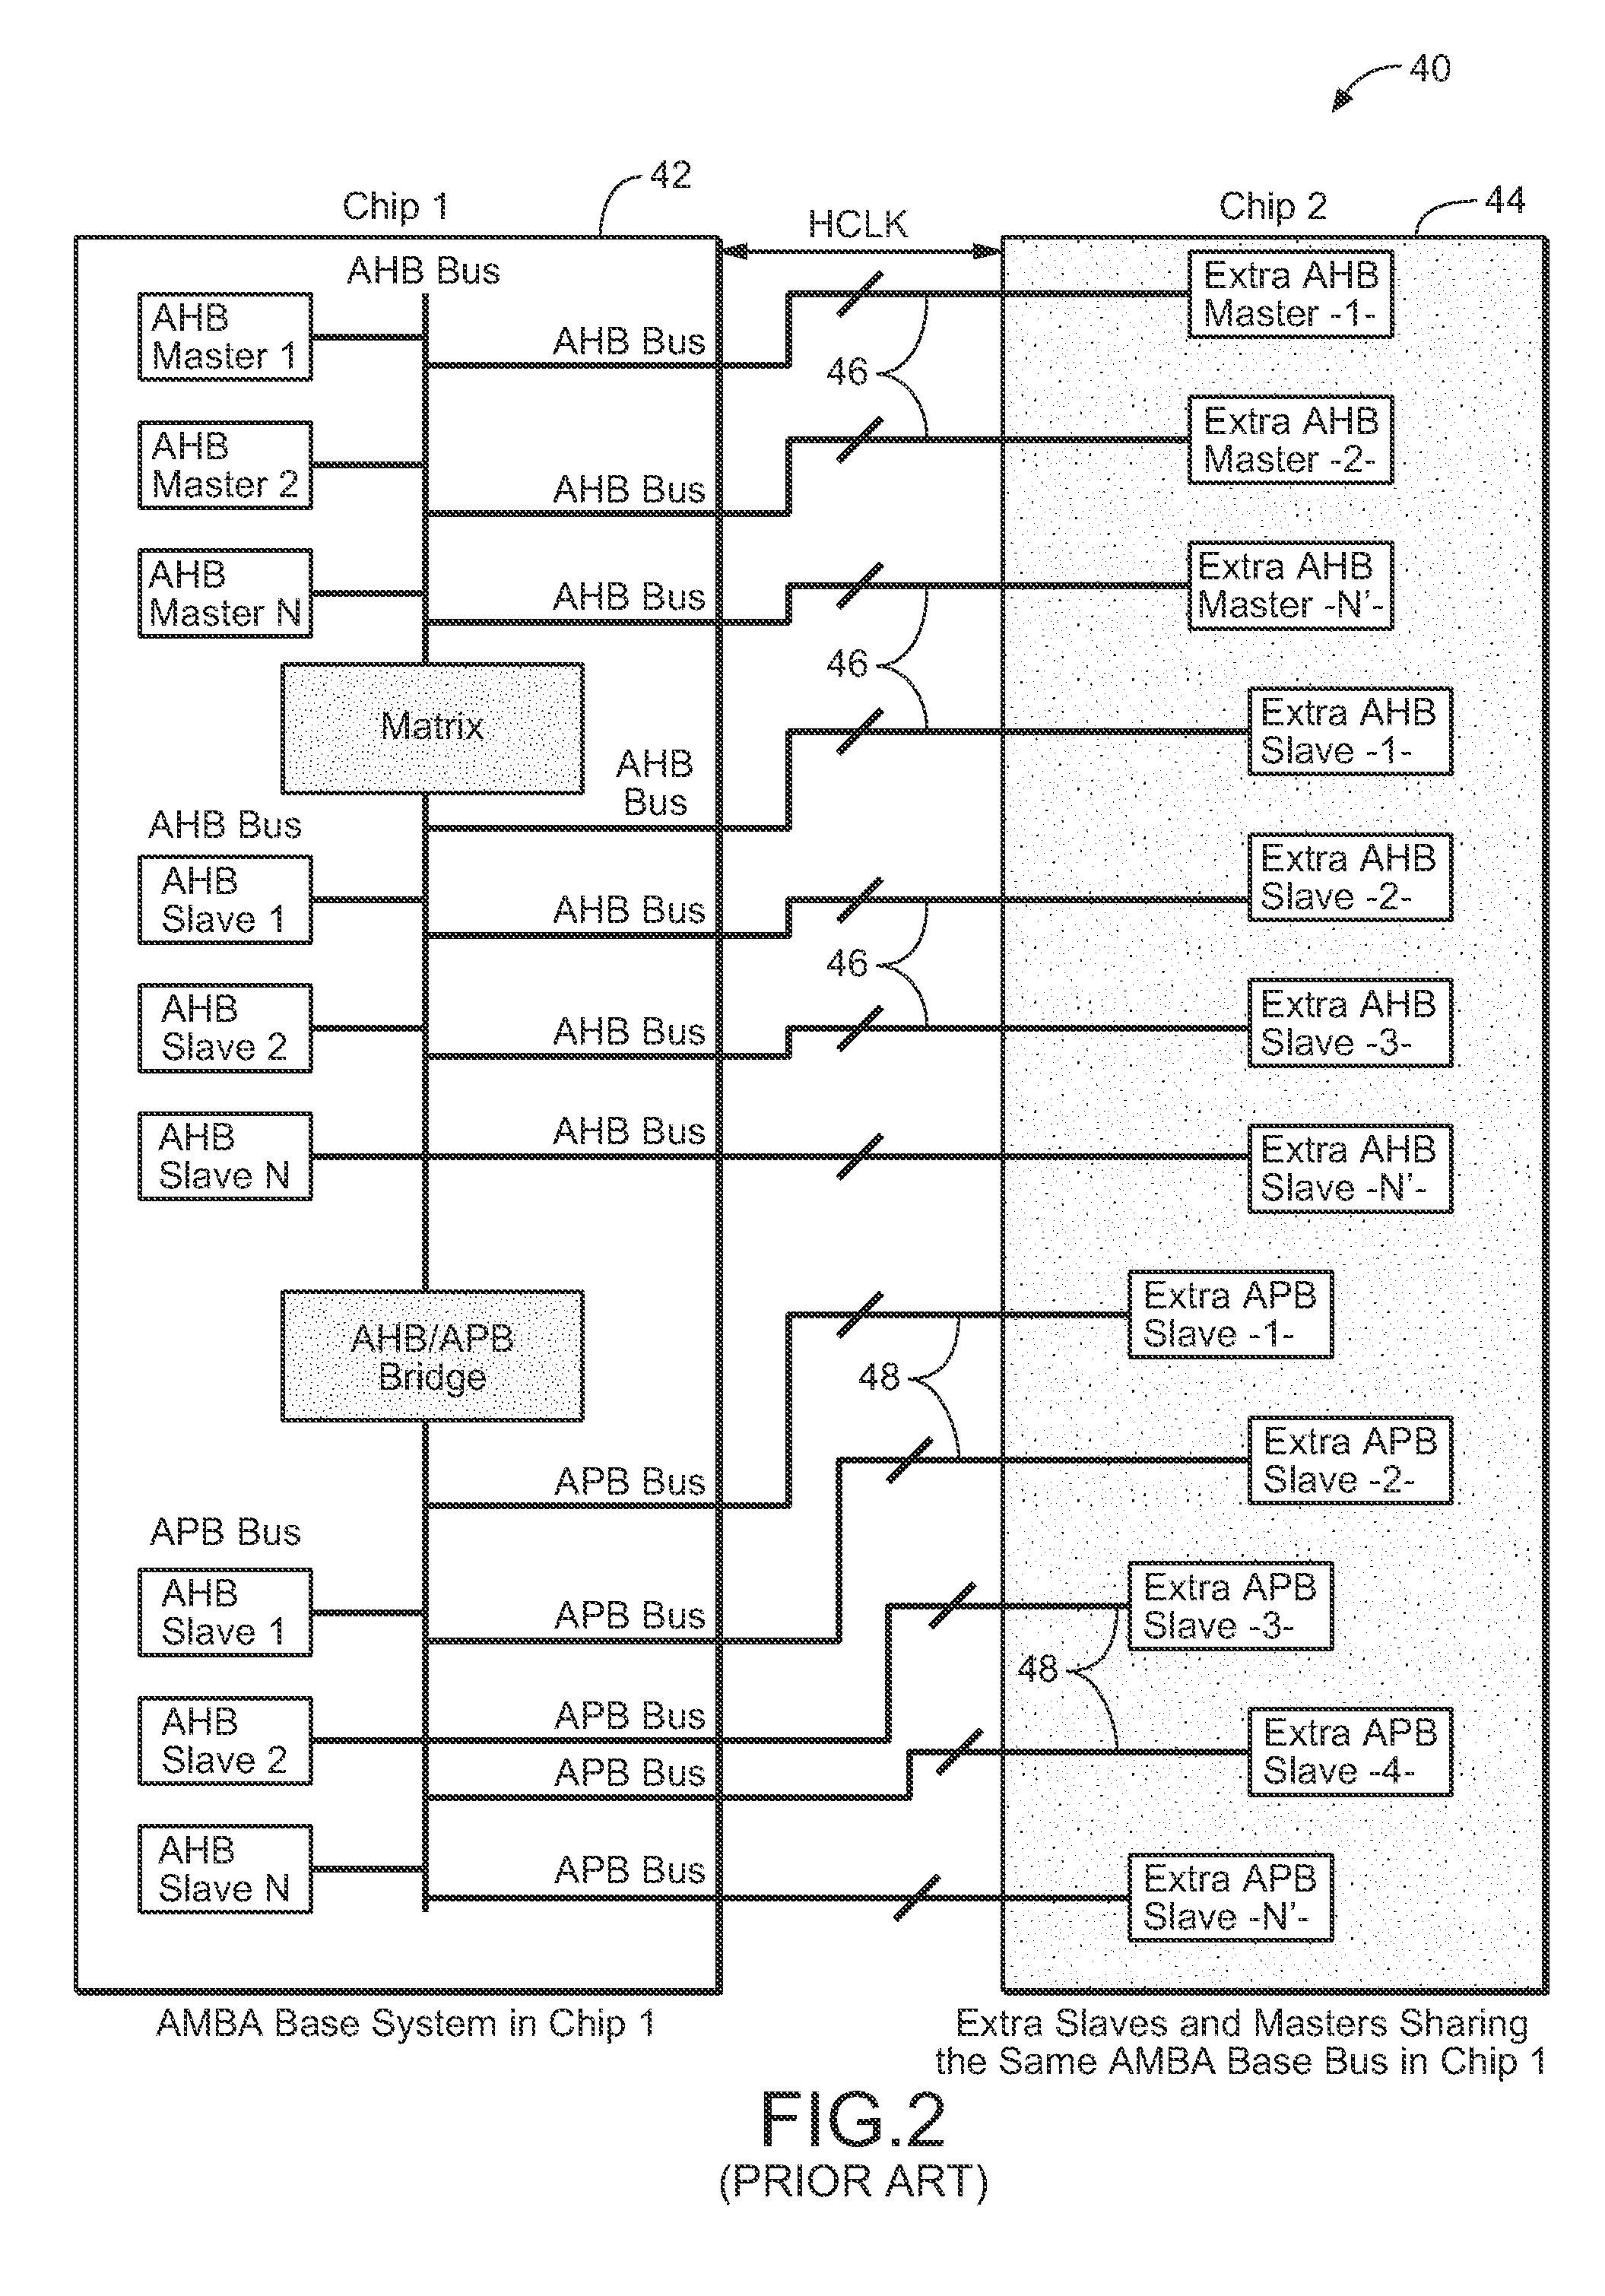 Serialization of data for communication with different-protocol slave in multi-chip bus implementation